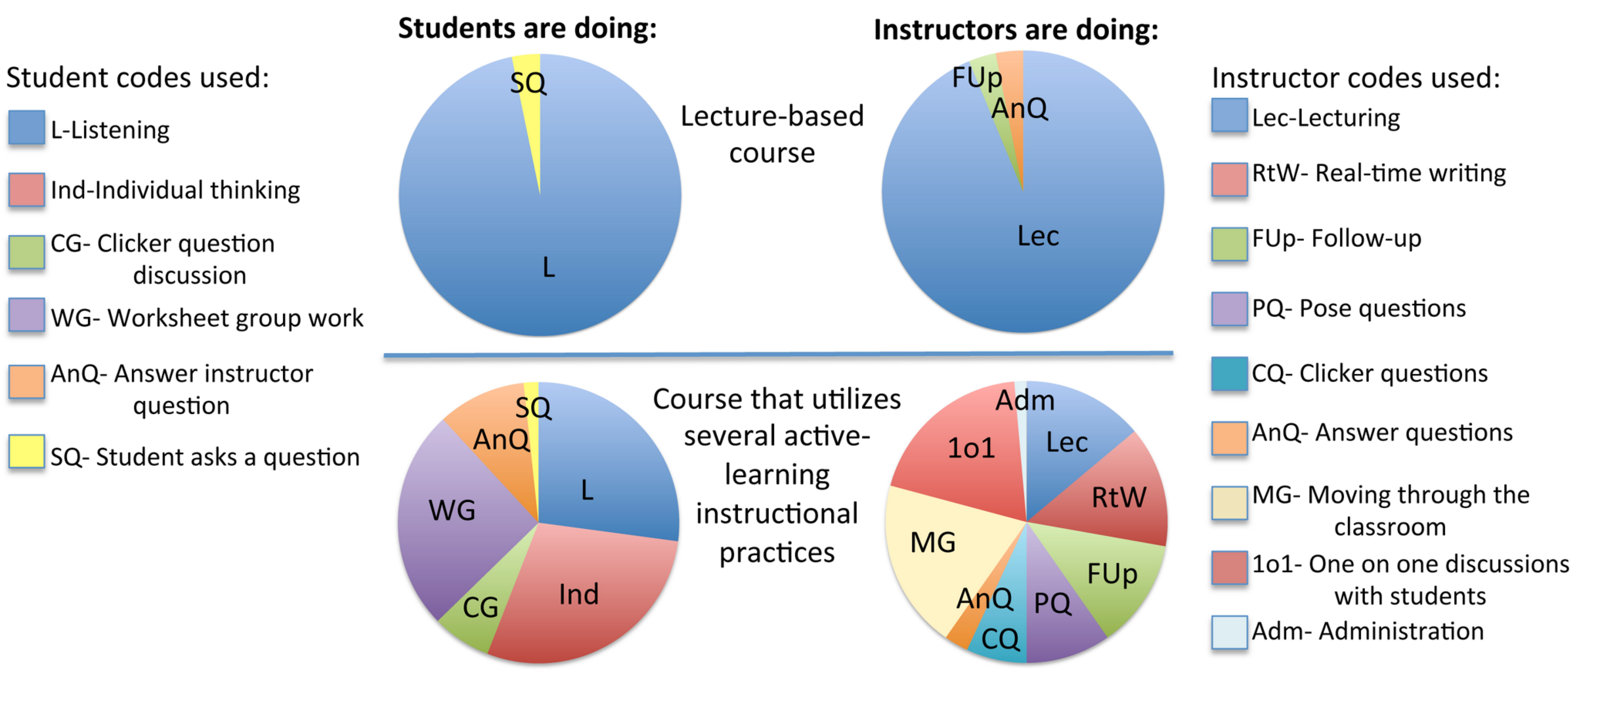 pie charts of student and instructor activities measured by COPUS